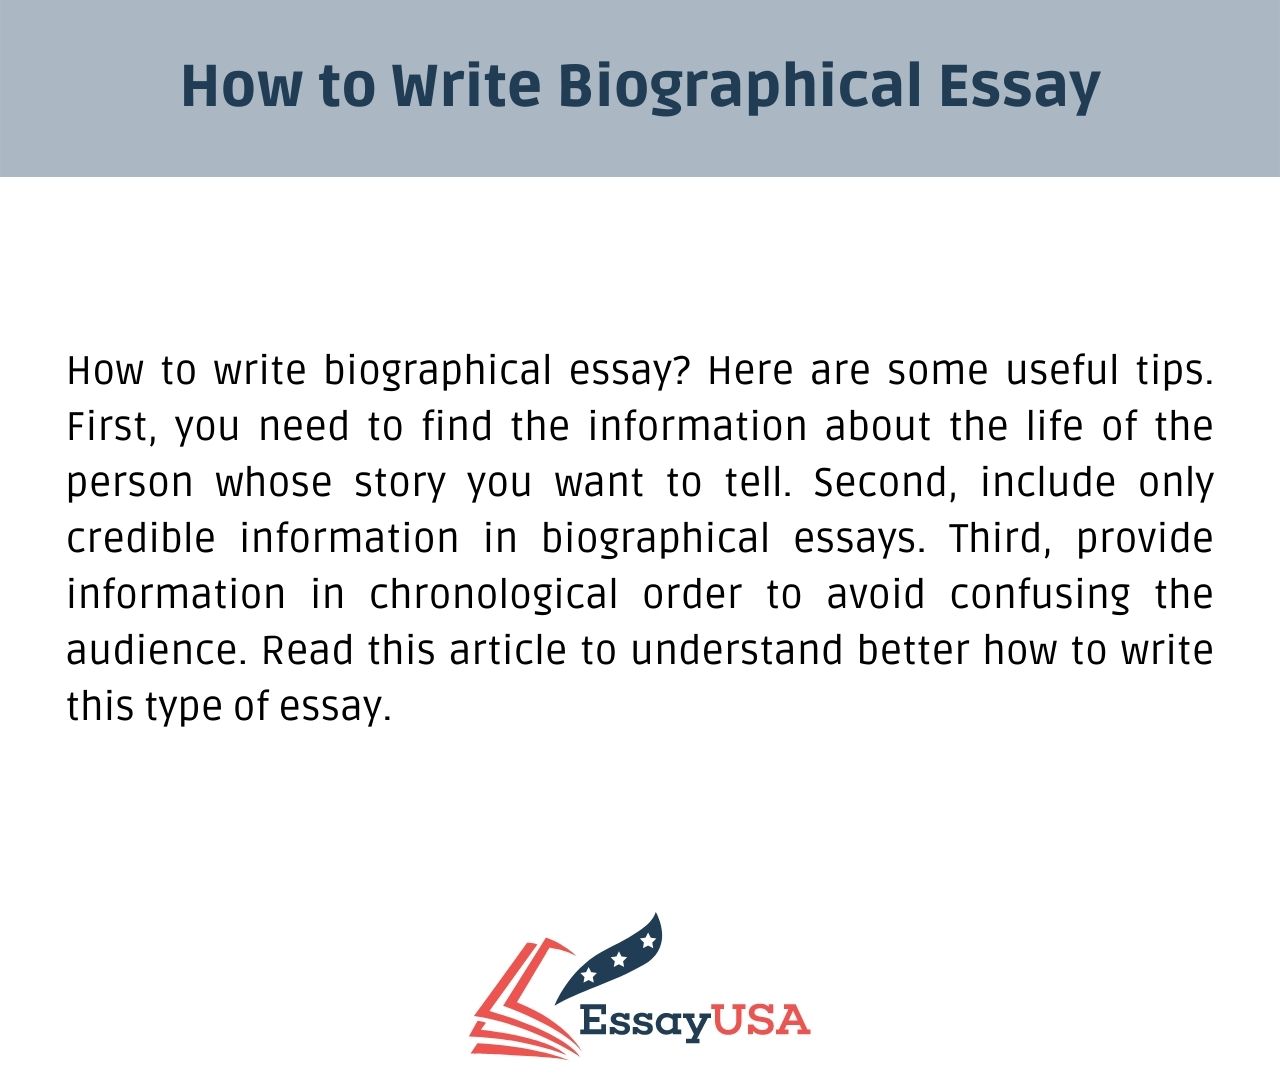 how to write a historical biographical essay